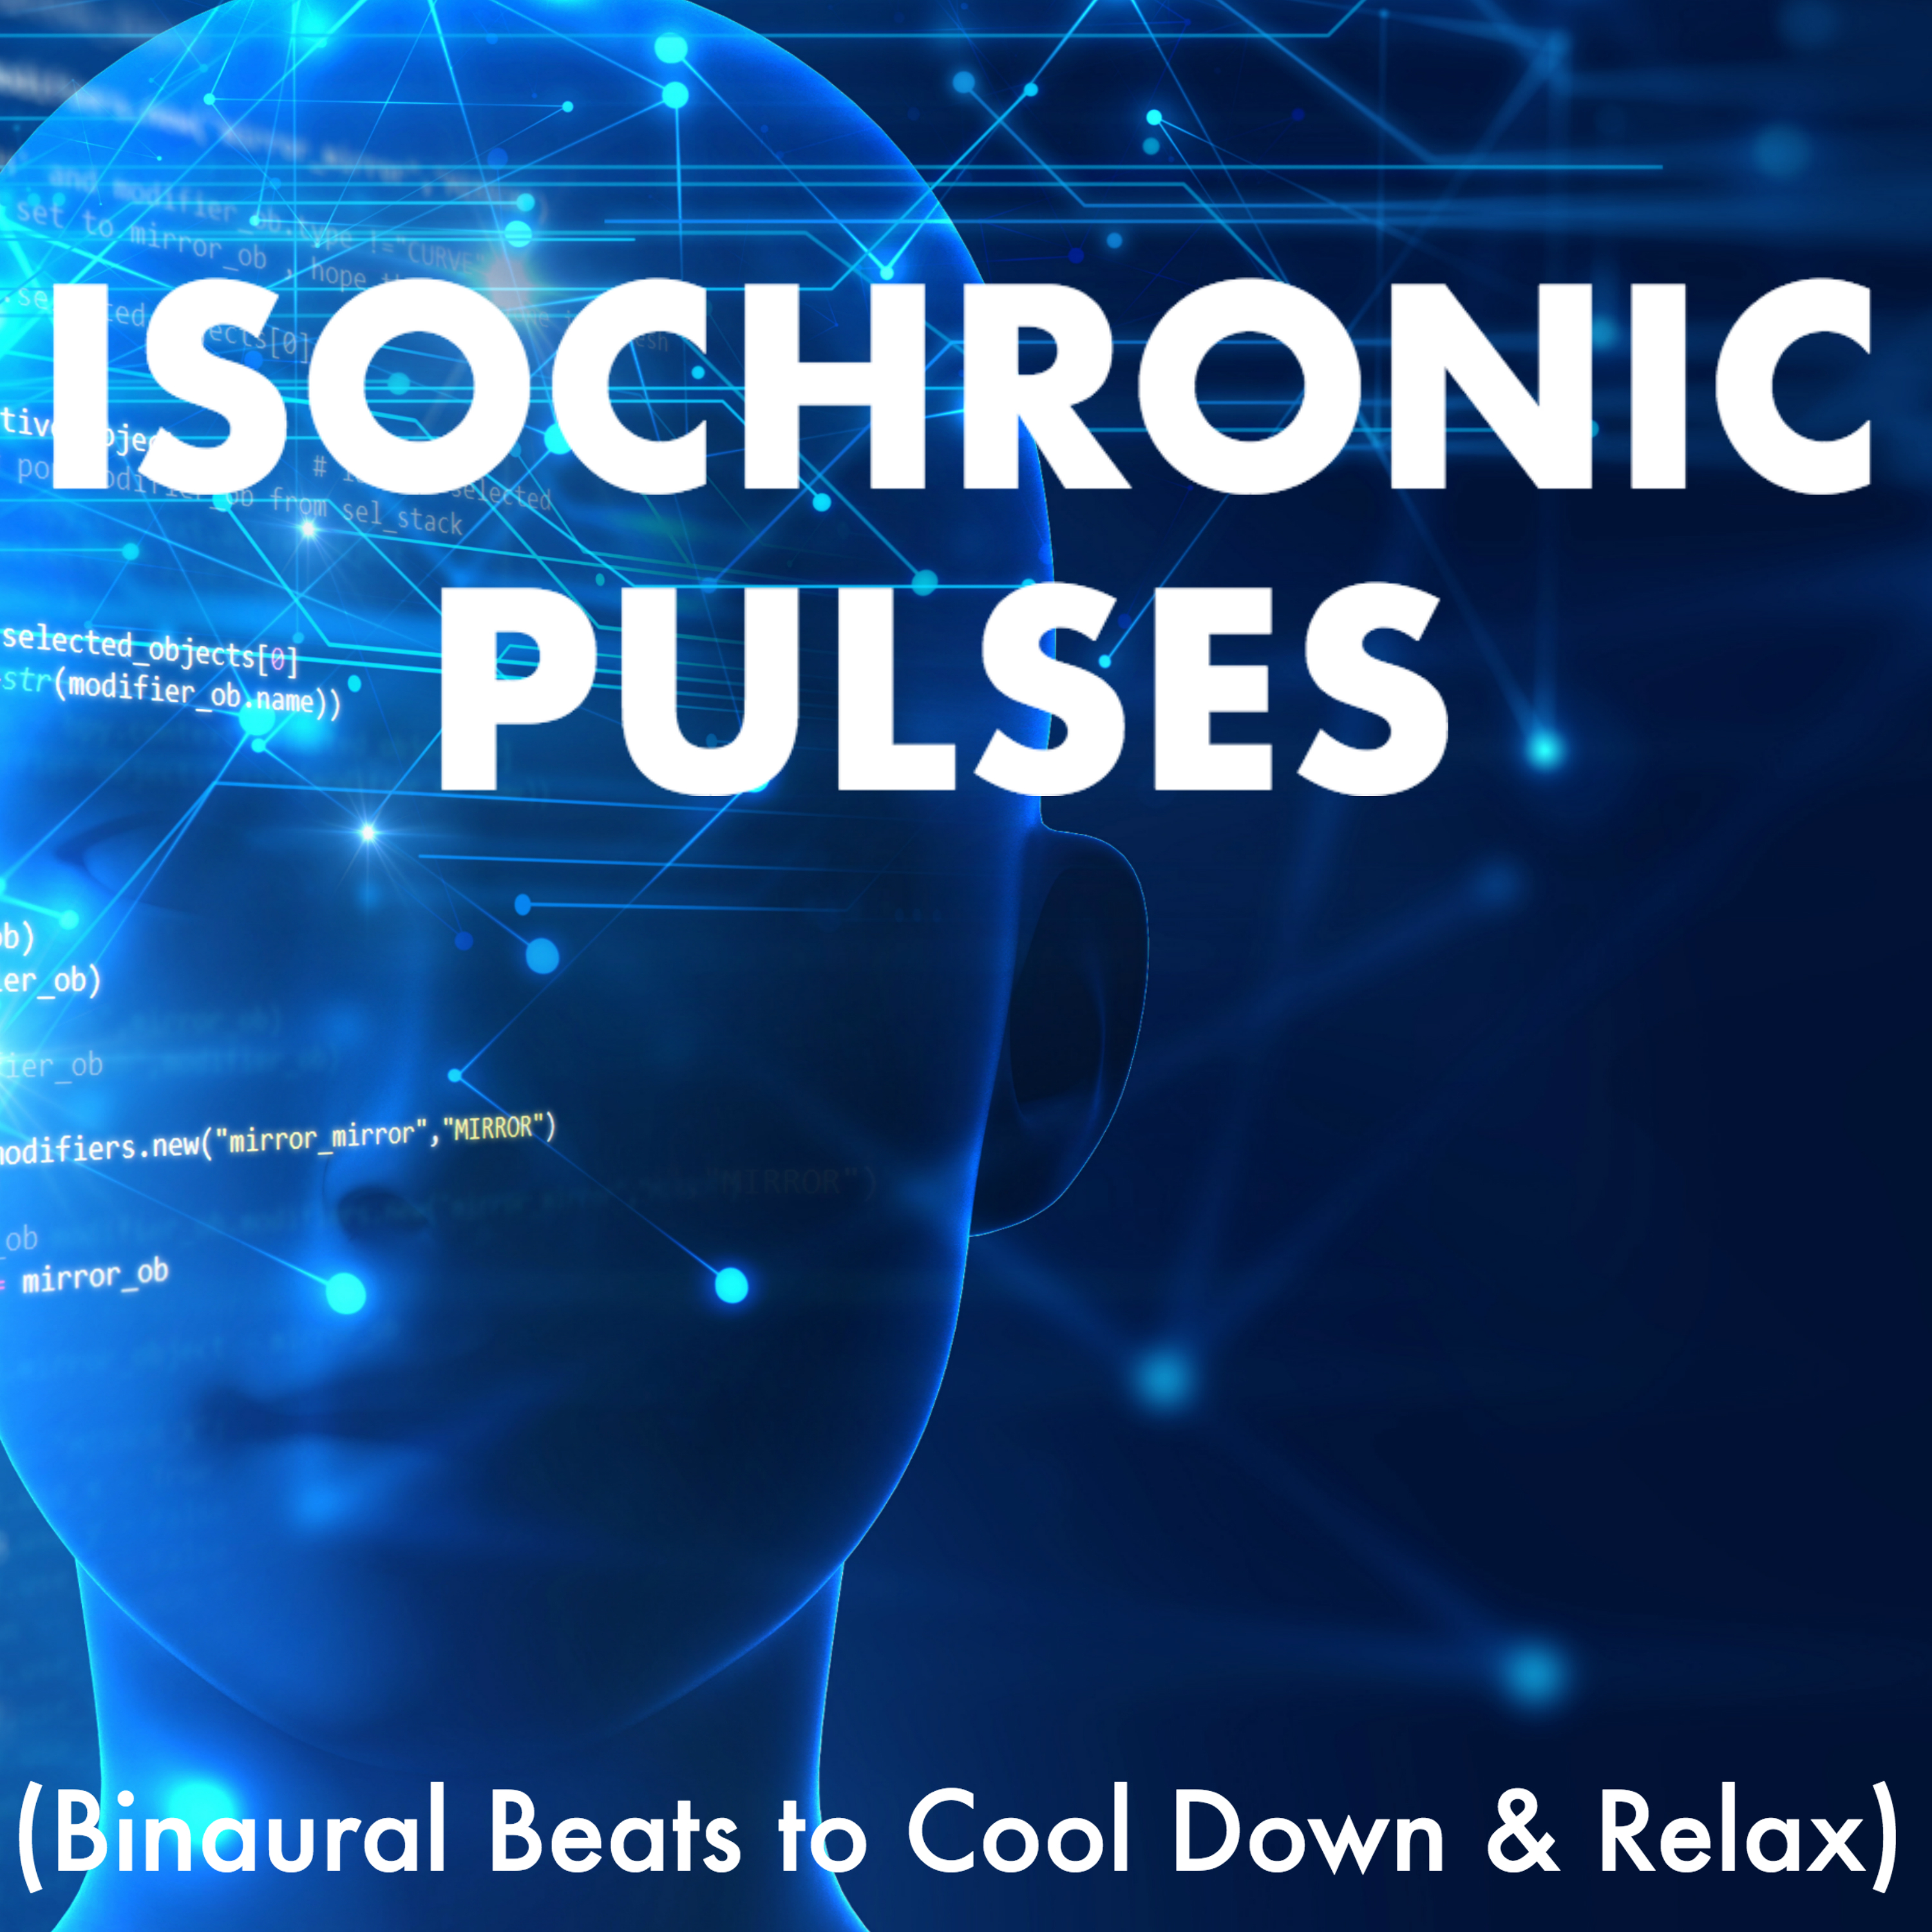 Isochronic Pulses - Binaural Beats to Cool Down & Relax, Anti Stress for Break Time